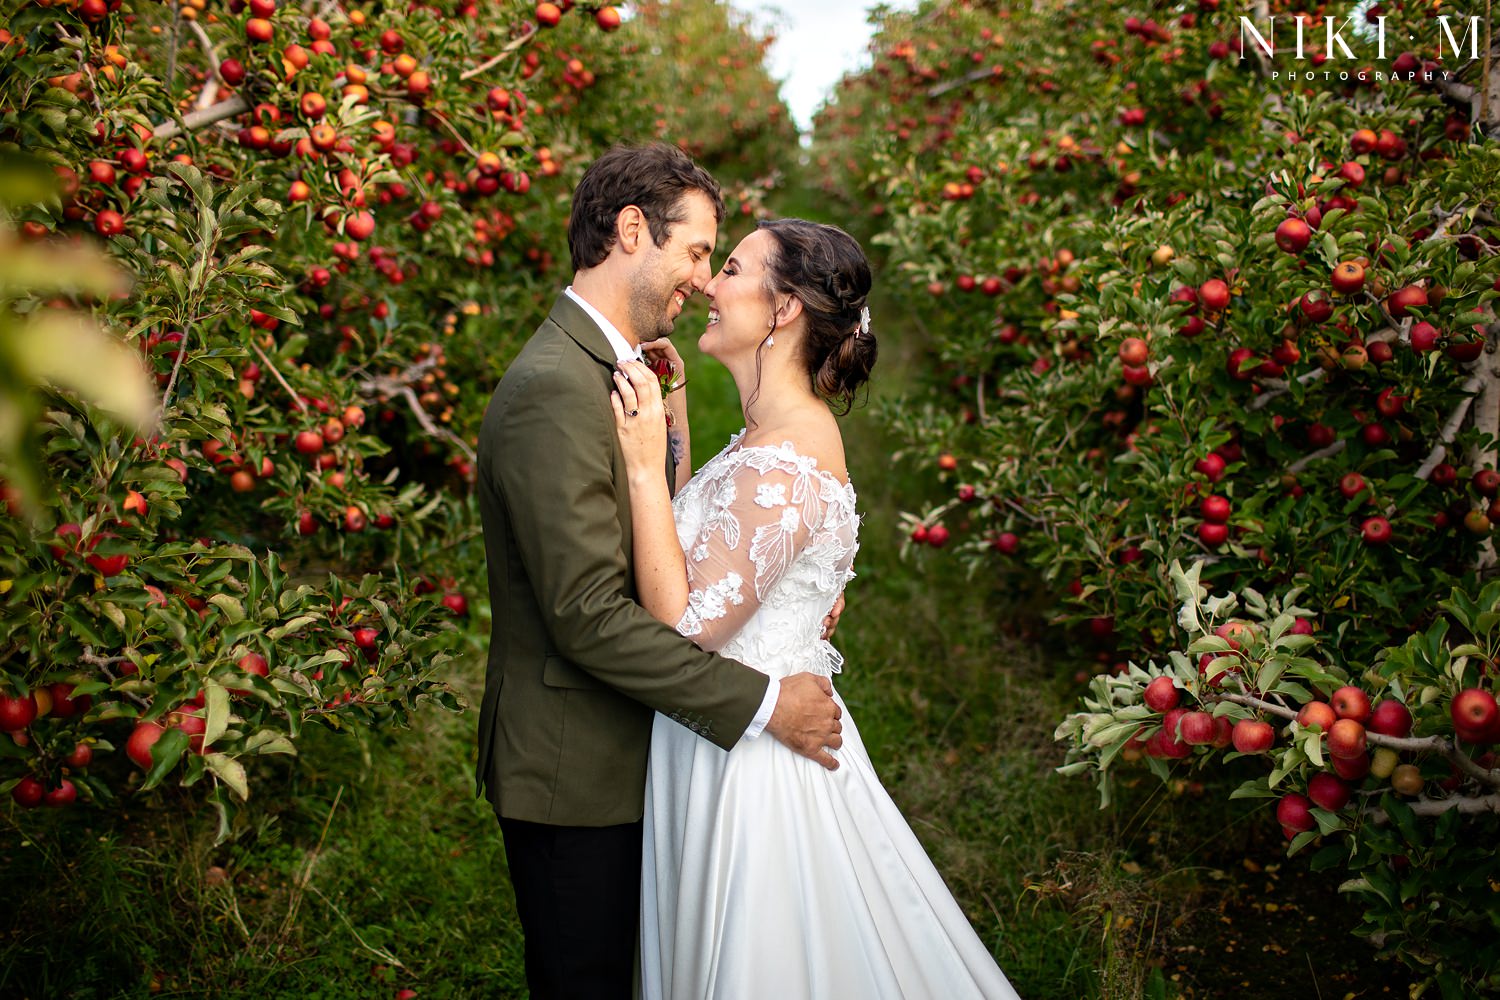 The bride and groom touch noses and laugh whilst surrounded by red apple trees in an apple orchard for their Elgin wedding at Cherry Glamping